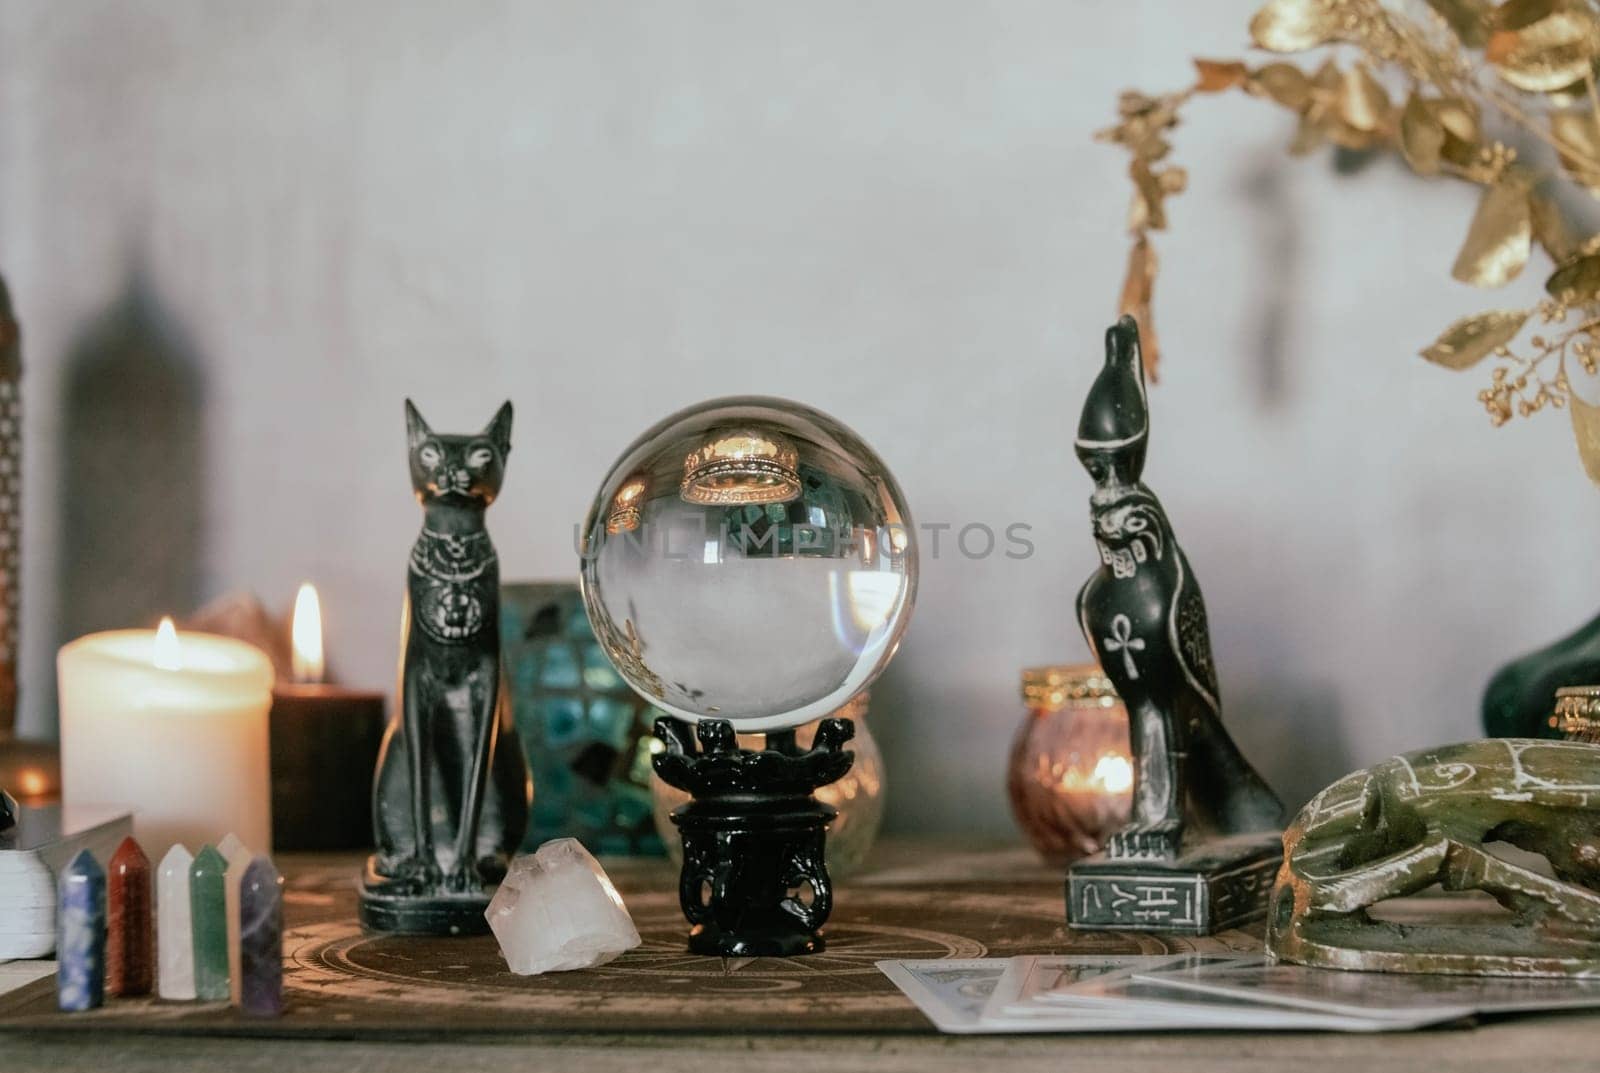 Esoteric Divination Setup with Tarot Cards and Crystal Ball. by jbruiz78